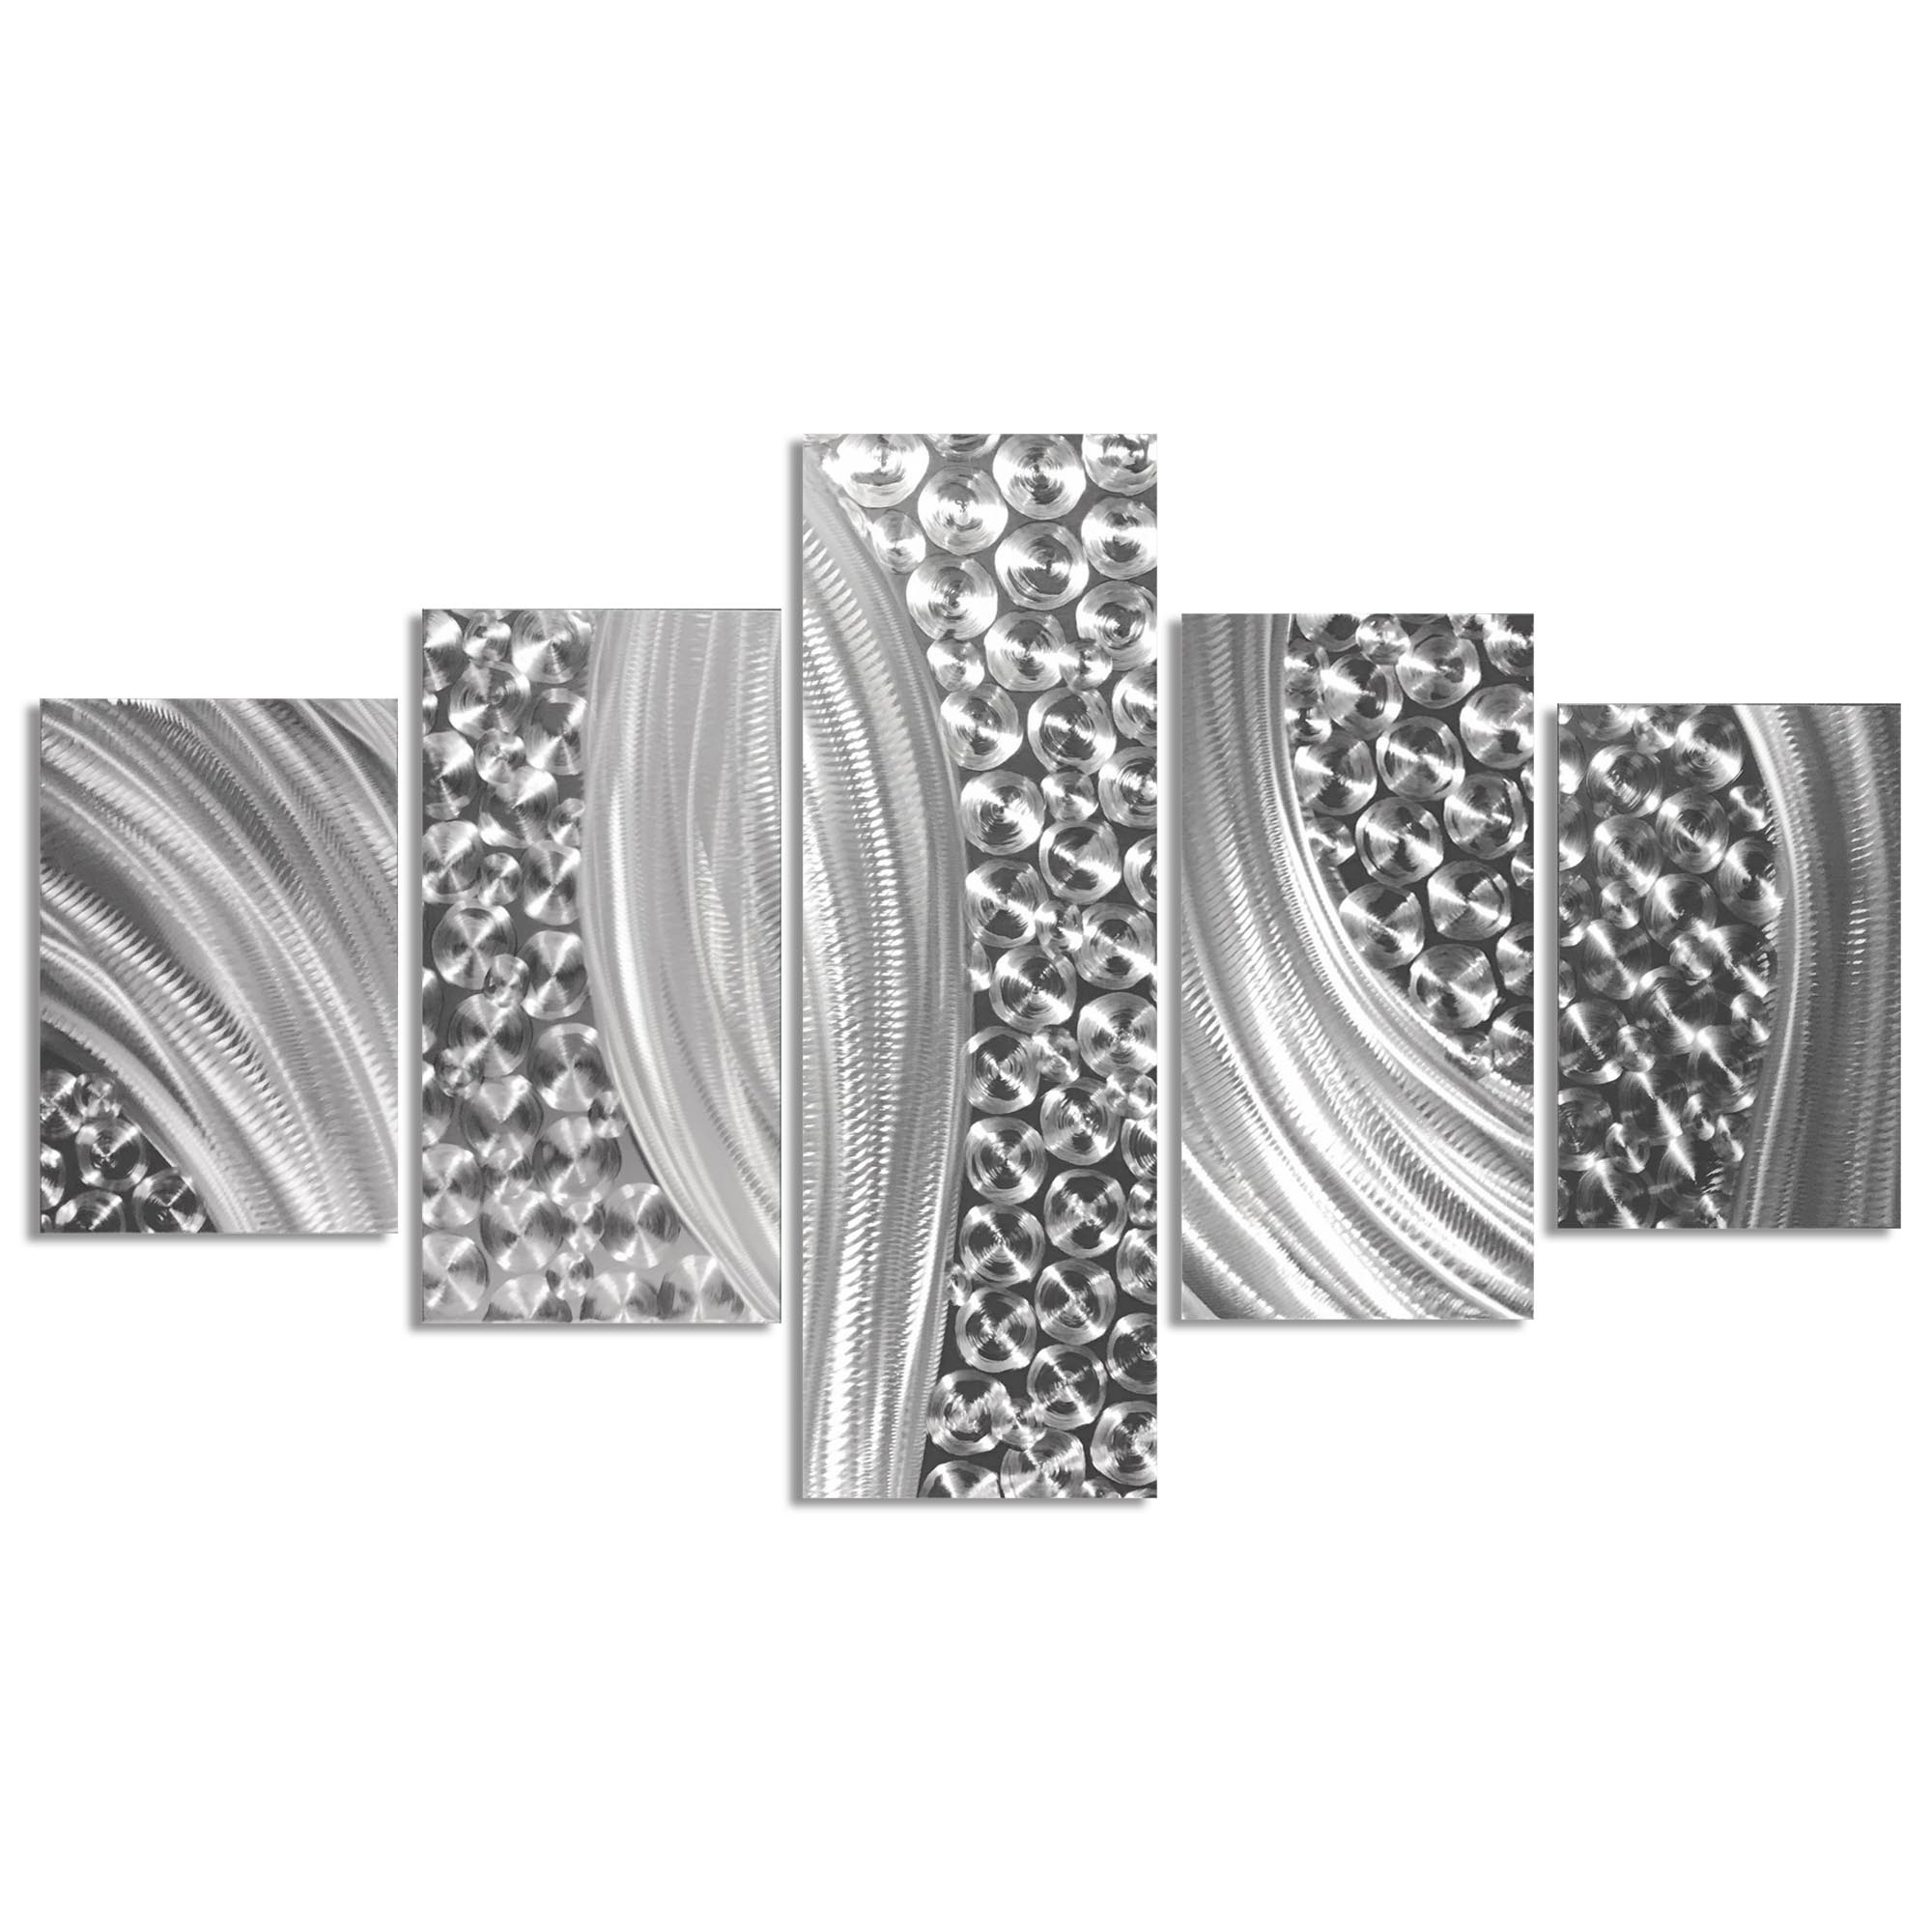 Columnar Riverbed 64x36in. Natural Aluminum Abstract Decor